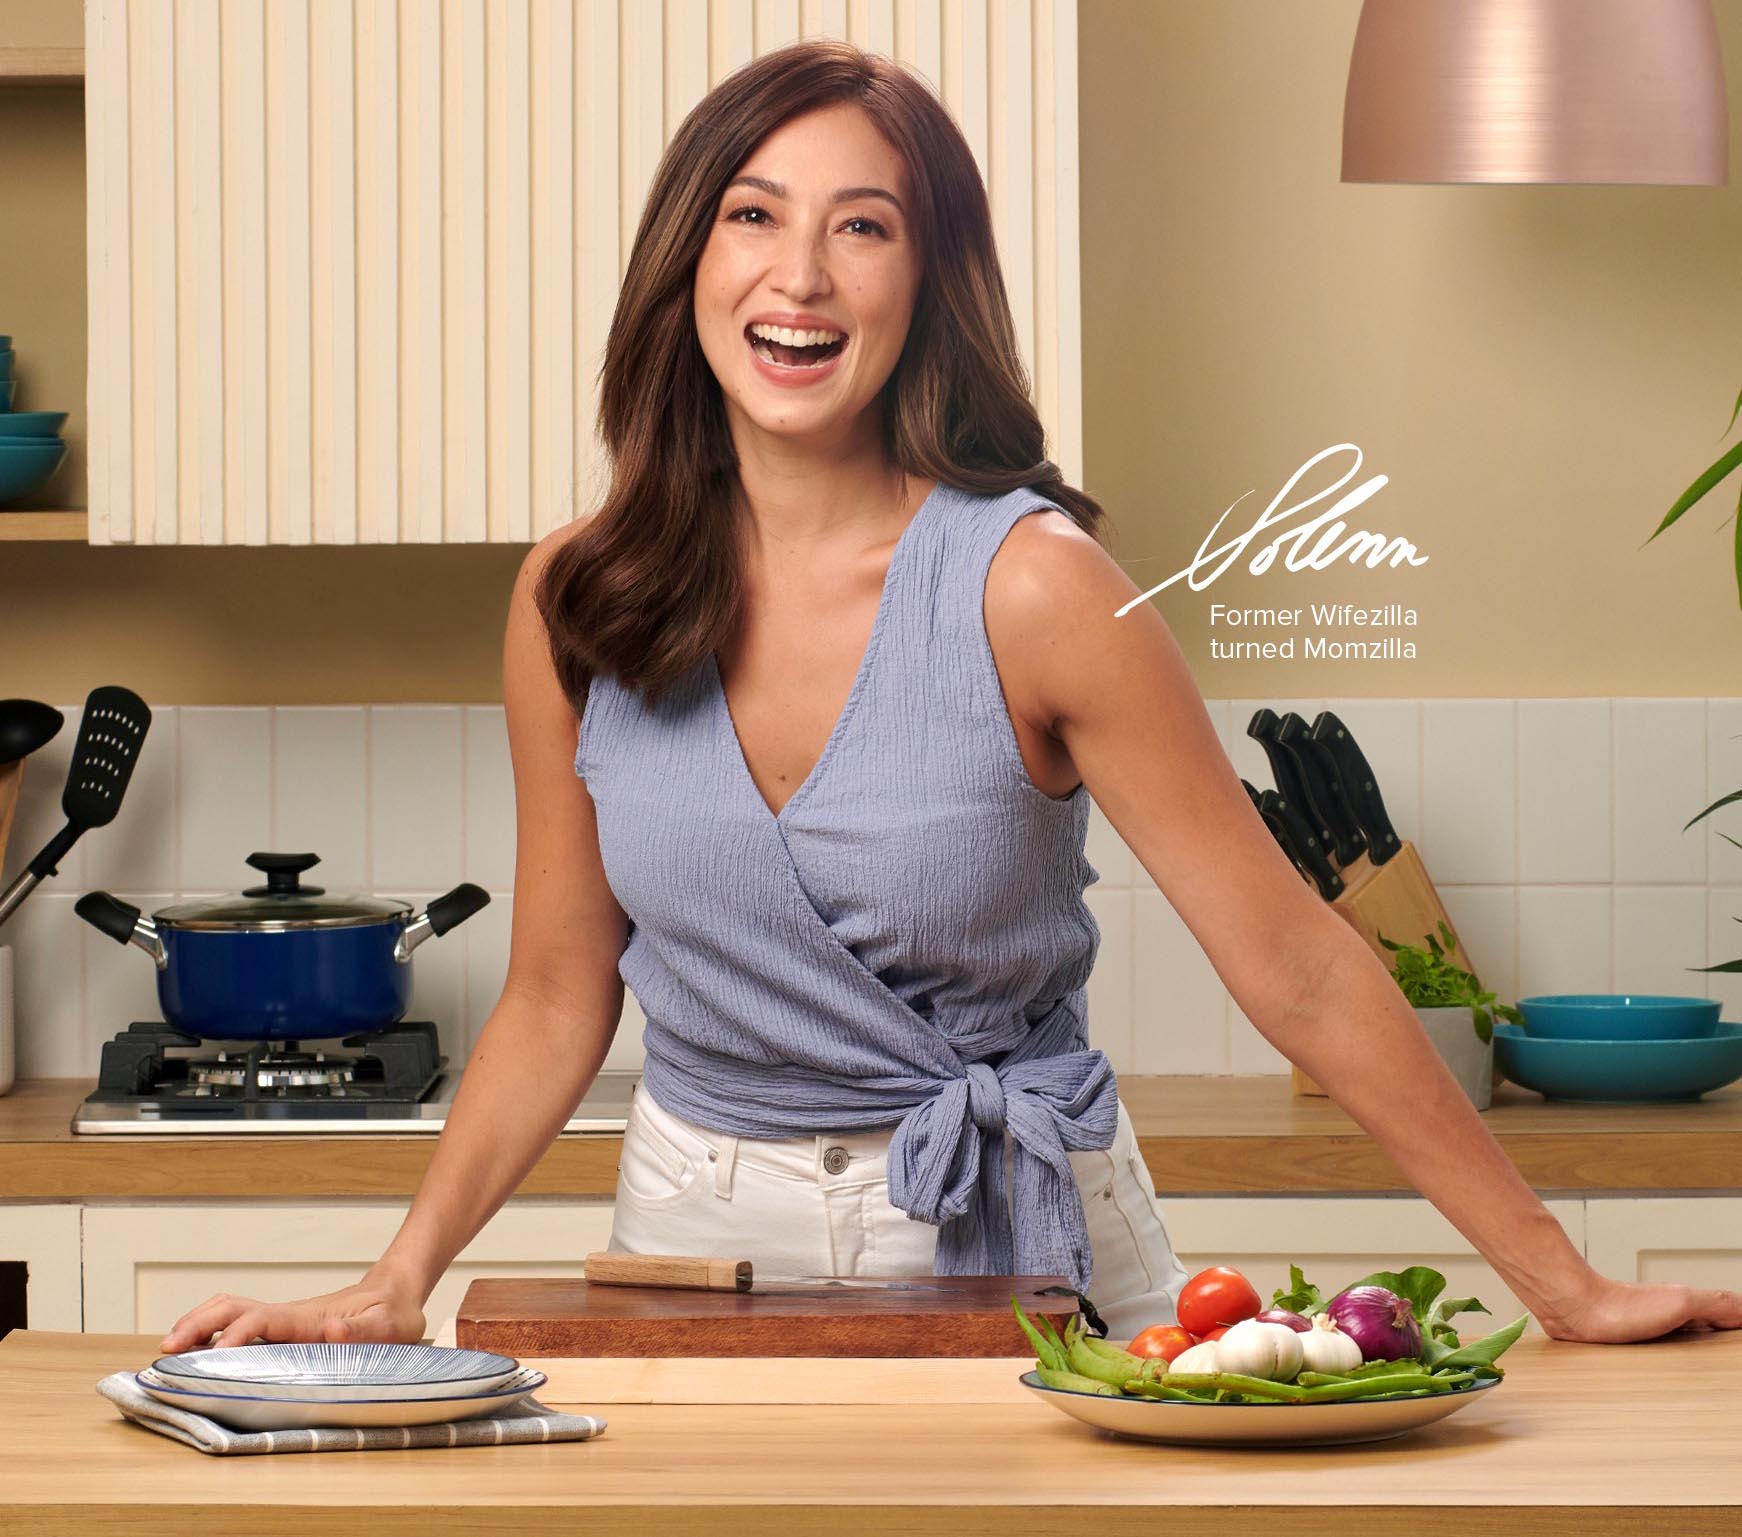 Solenn for Solane – the collab of the year is coming